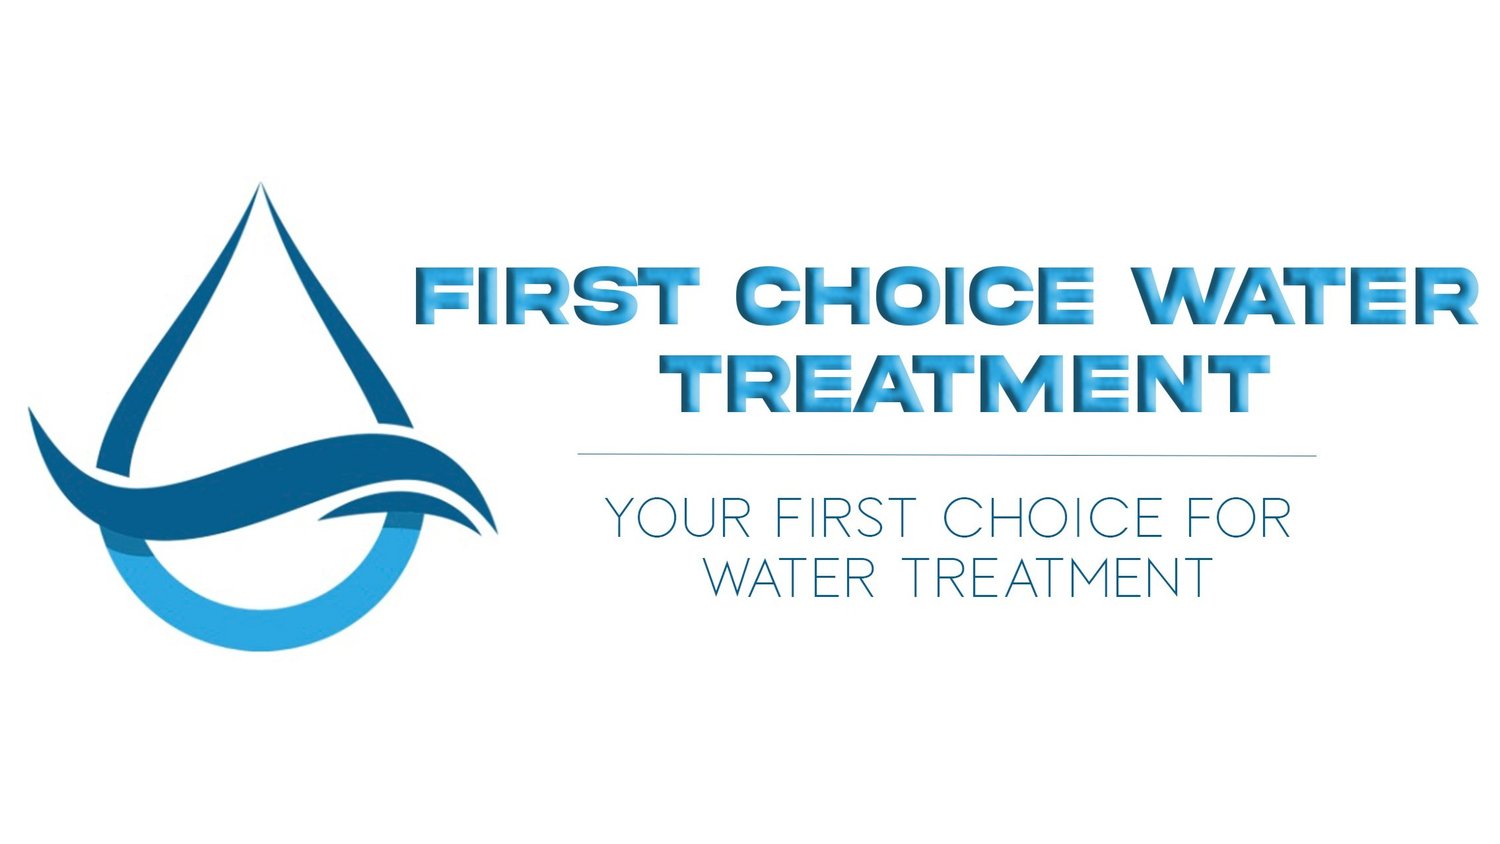 First Choice Water Treatment